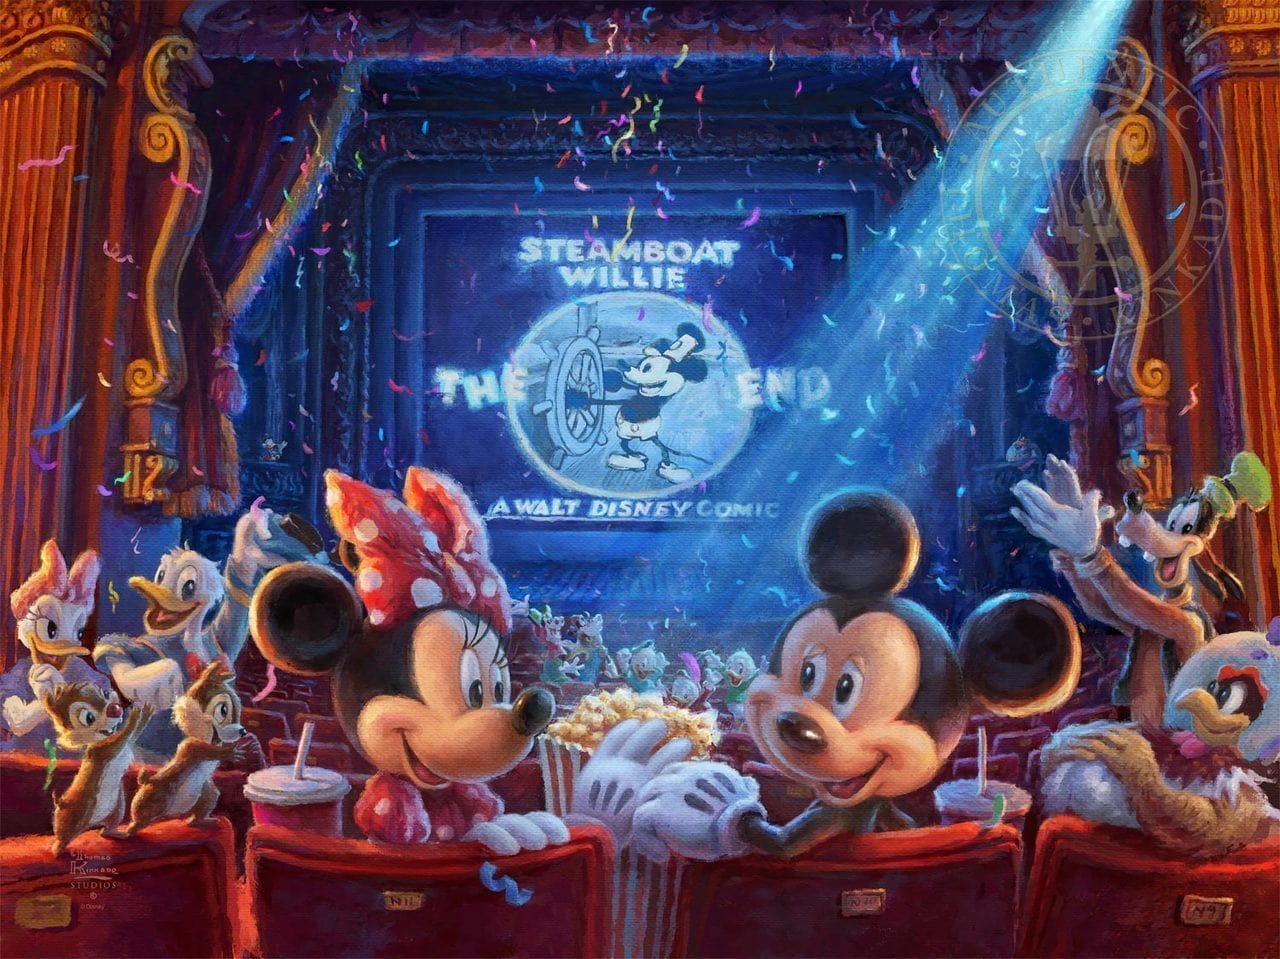 Mickey, Minnie and friends are celebrating 90 years of memories at the movie theater, 